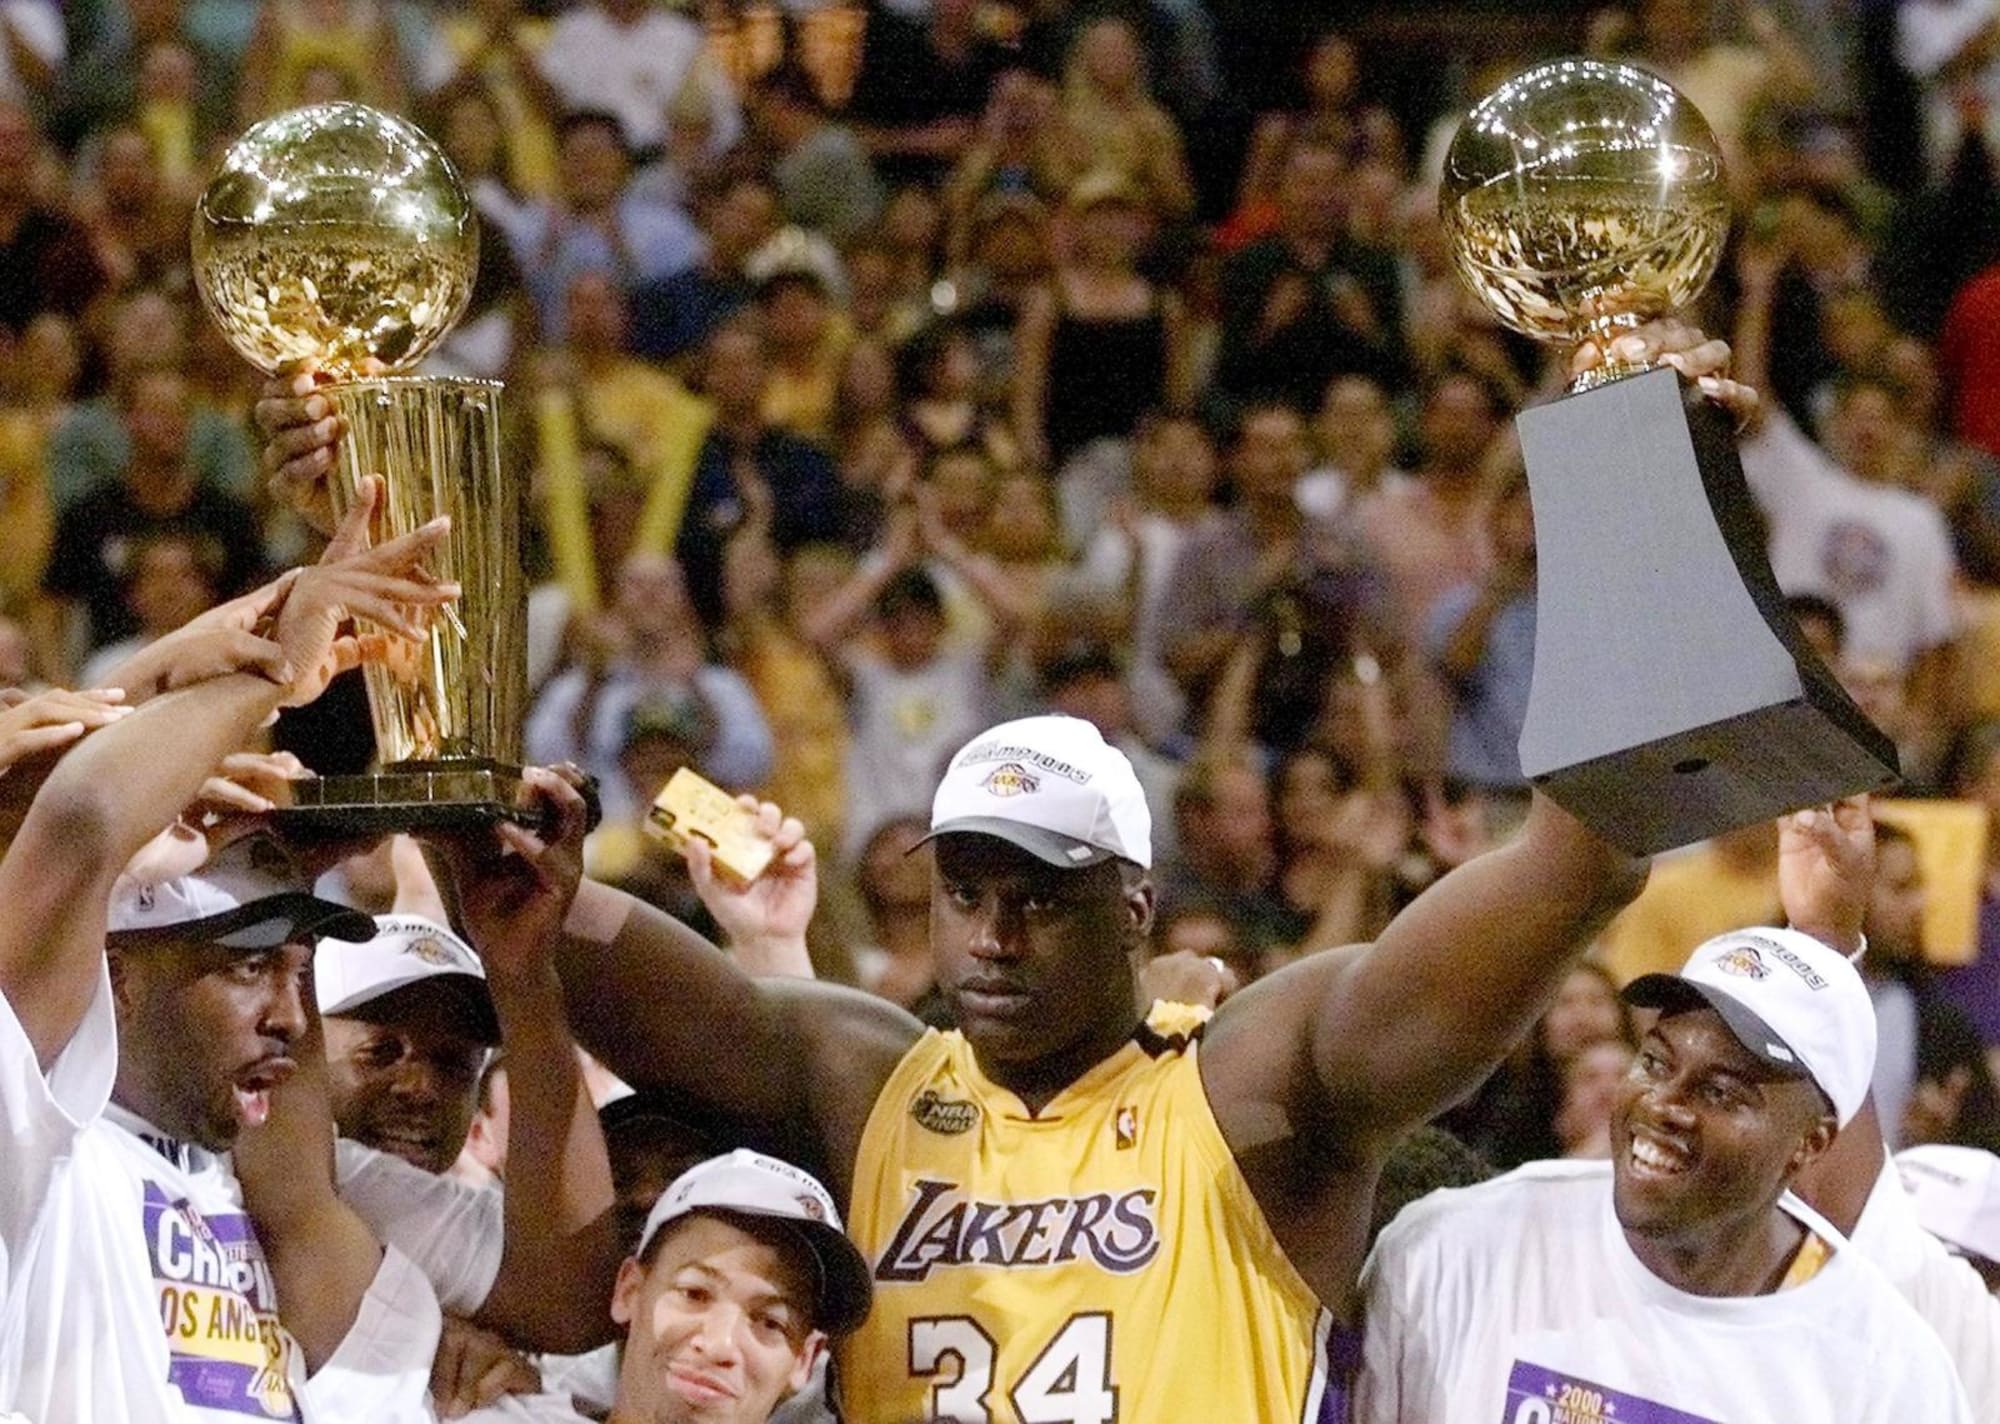 Lakers: The Diesel's Dominance - Shaquille O'Neal's 2000 MVP Season